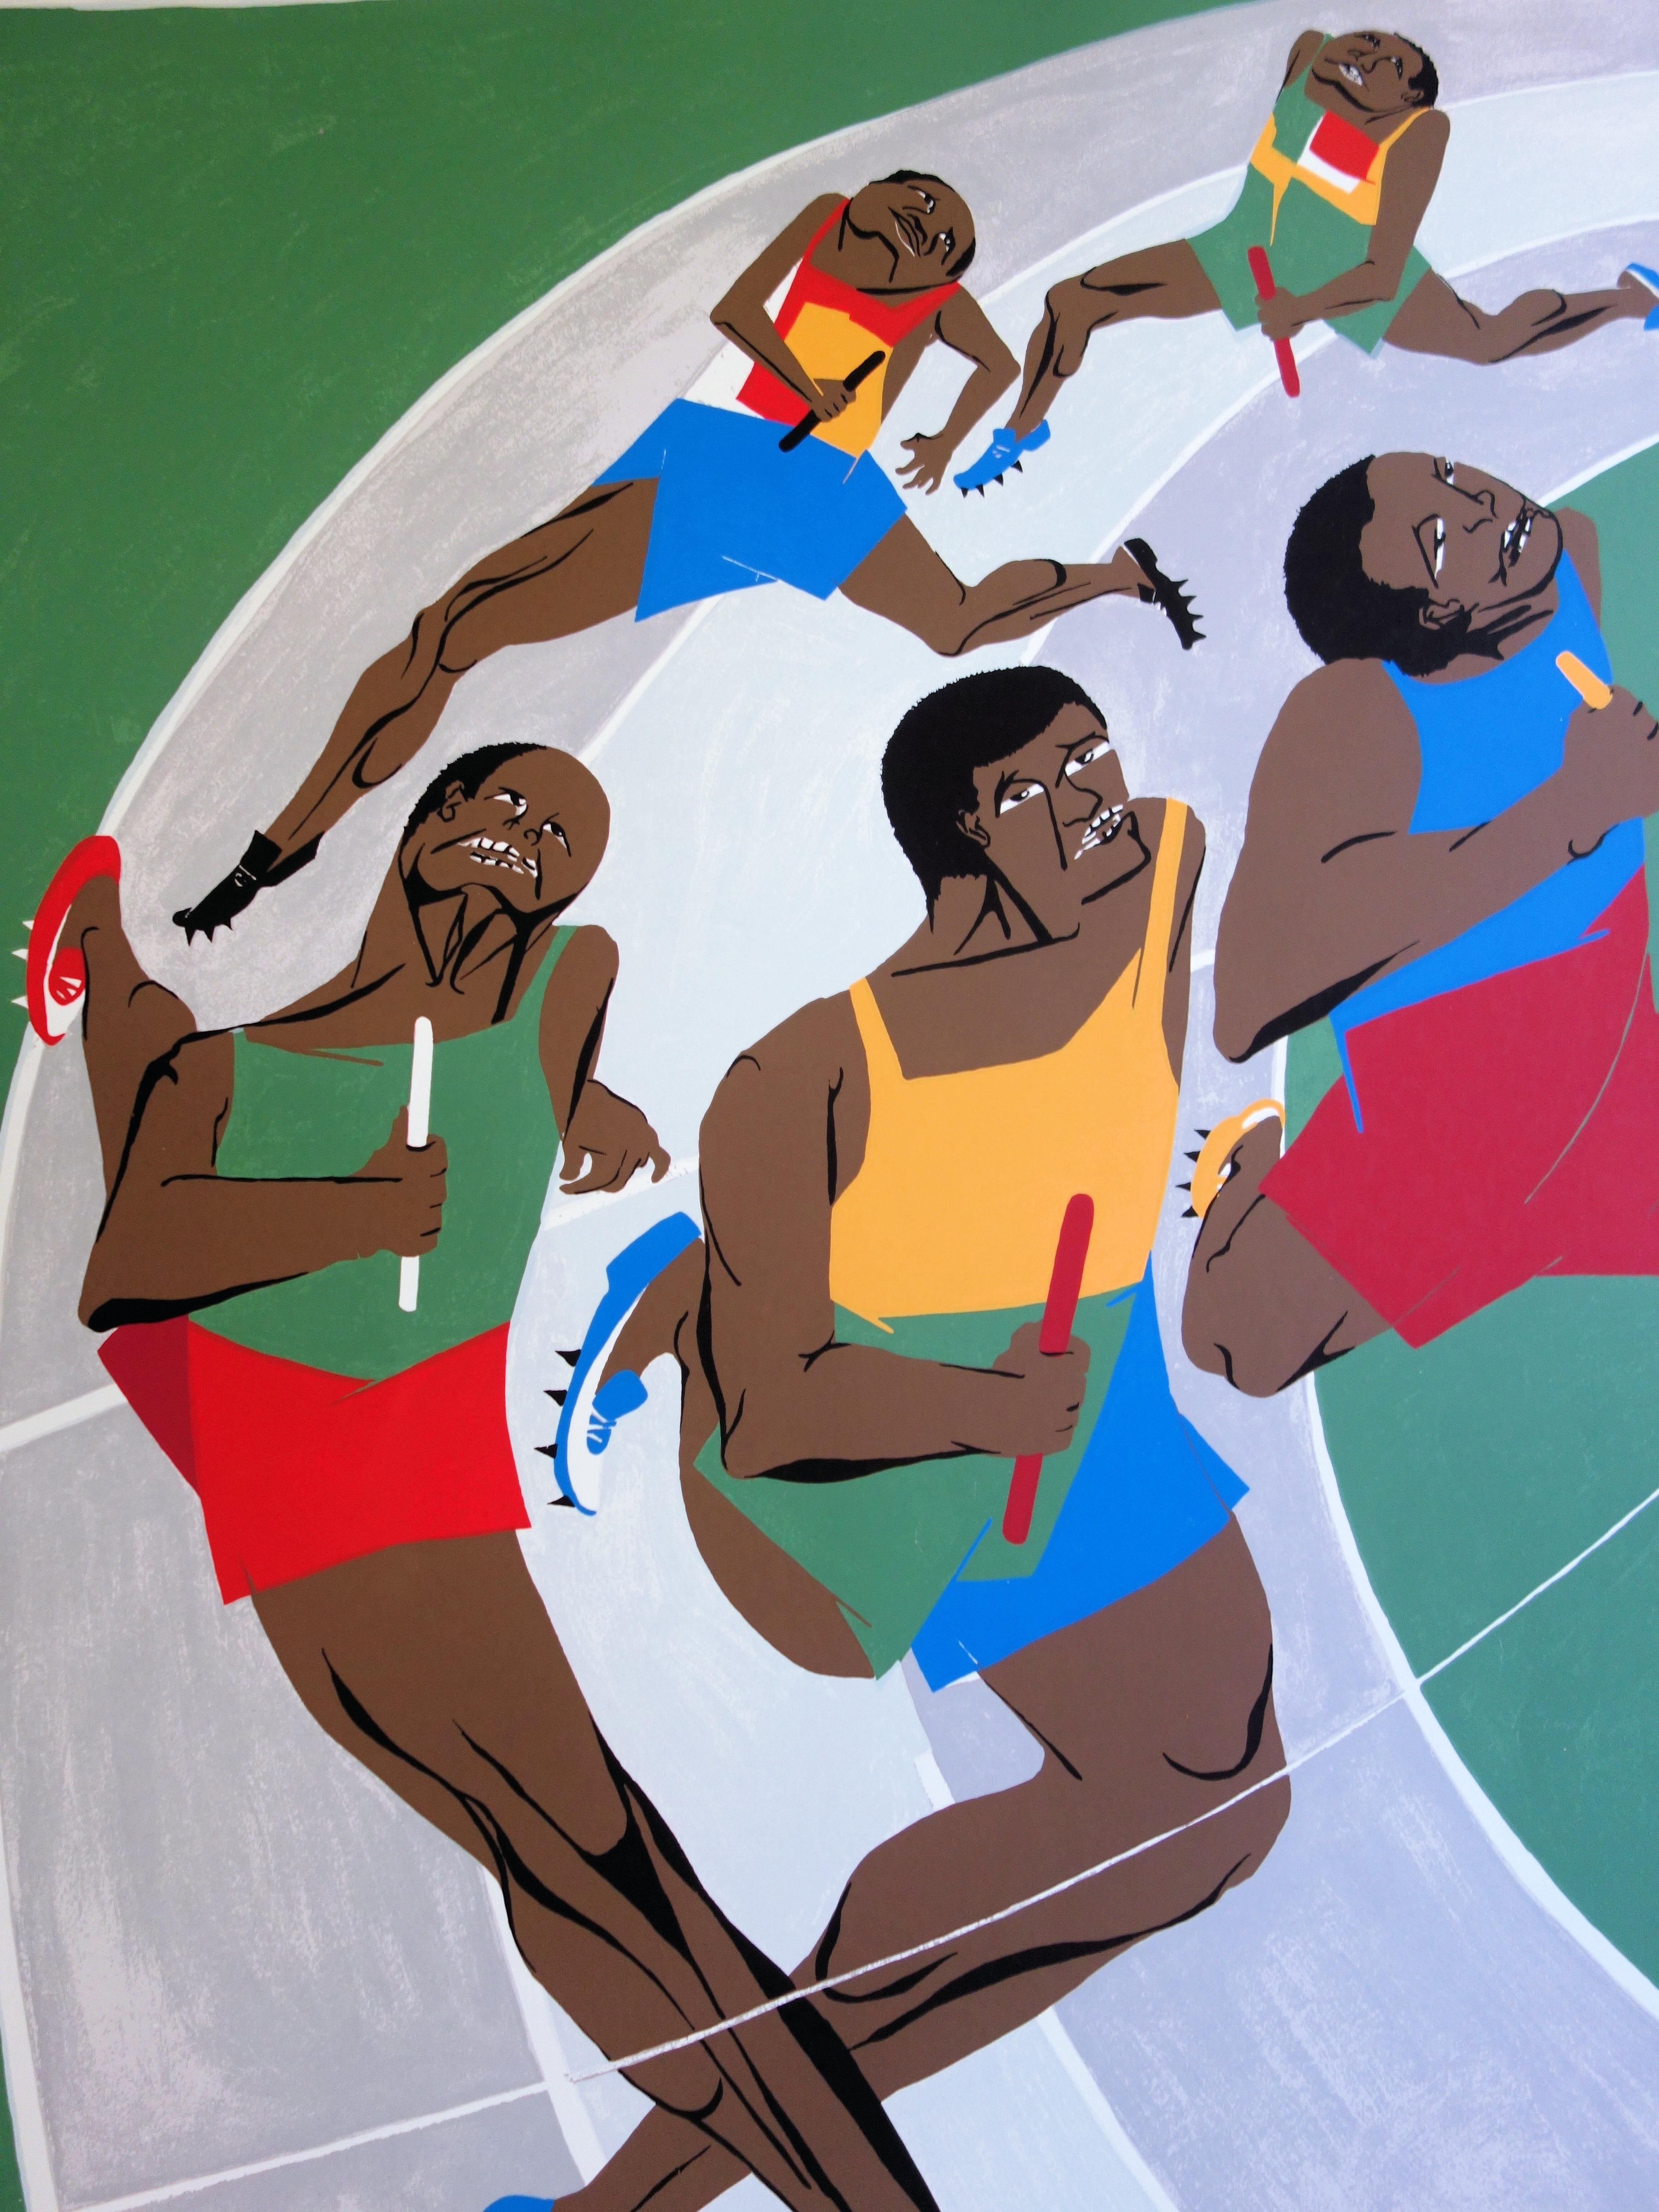 The Relay Race : Passing the Baton - Lithographie (Olympic Games Munich 1972) - Gris Abstract Print par Jacob Lawrence